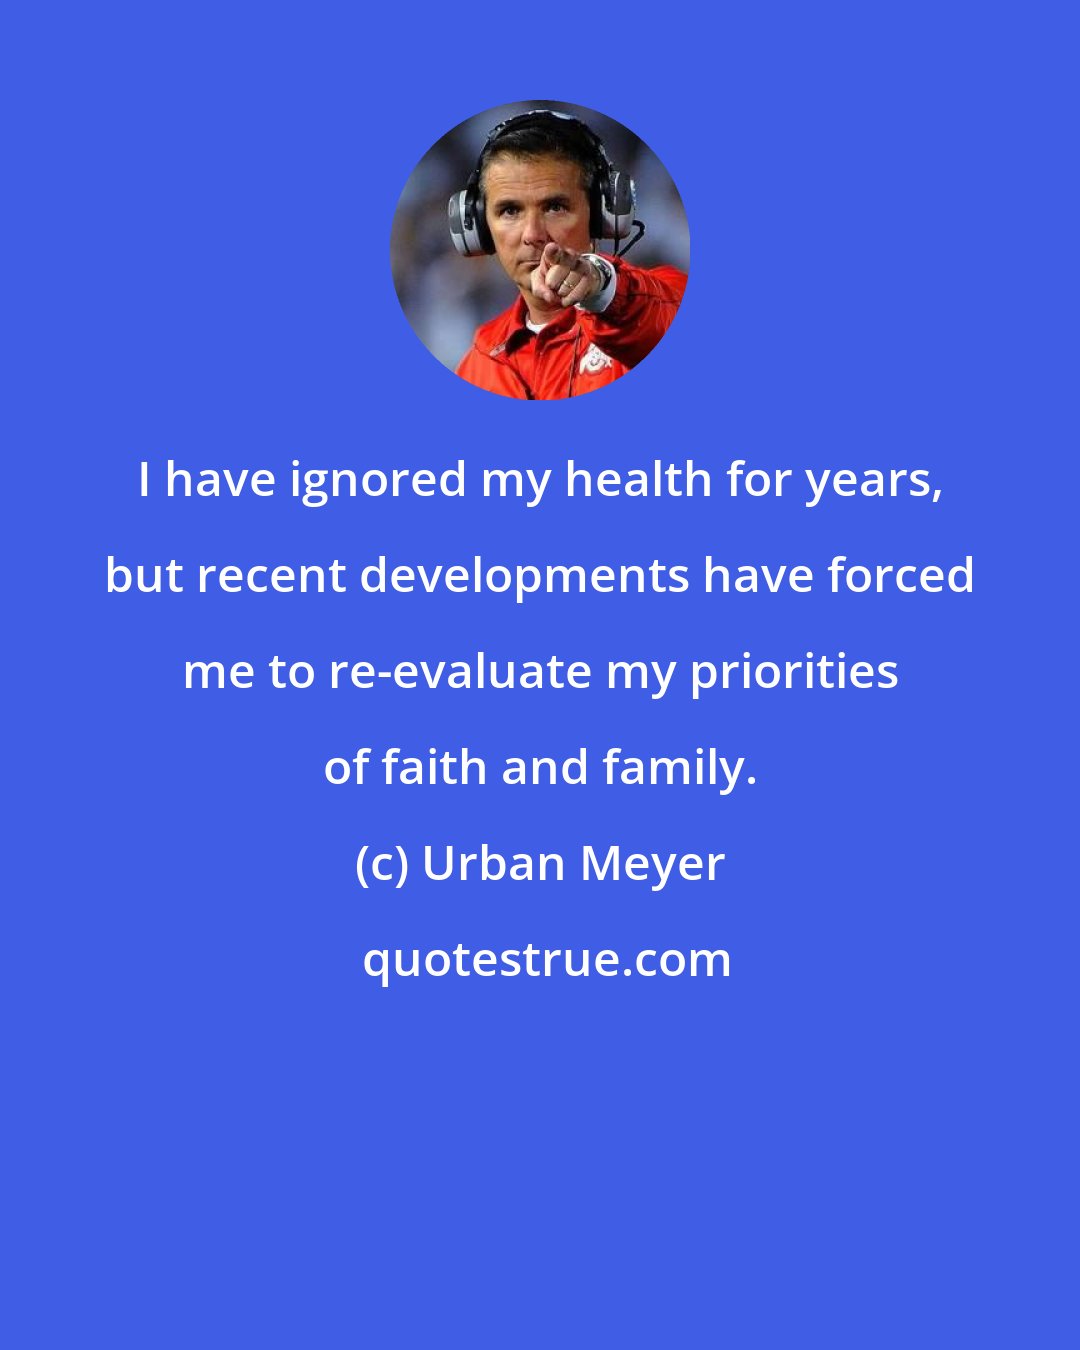 Urban Meyer: I have ignored my health for years, but recent developments have forced me to re-evaluate my priorities of faith and family.